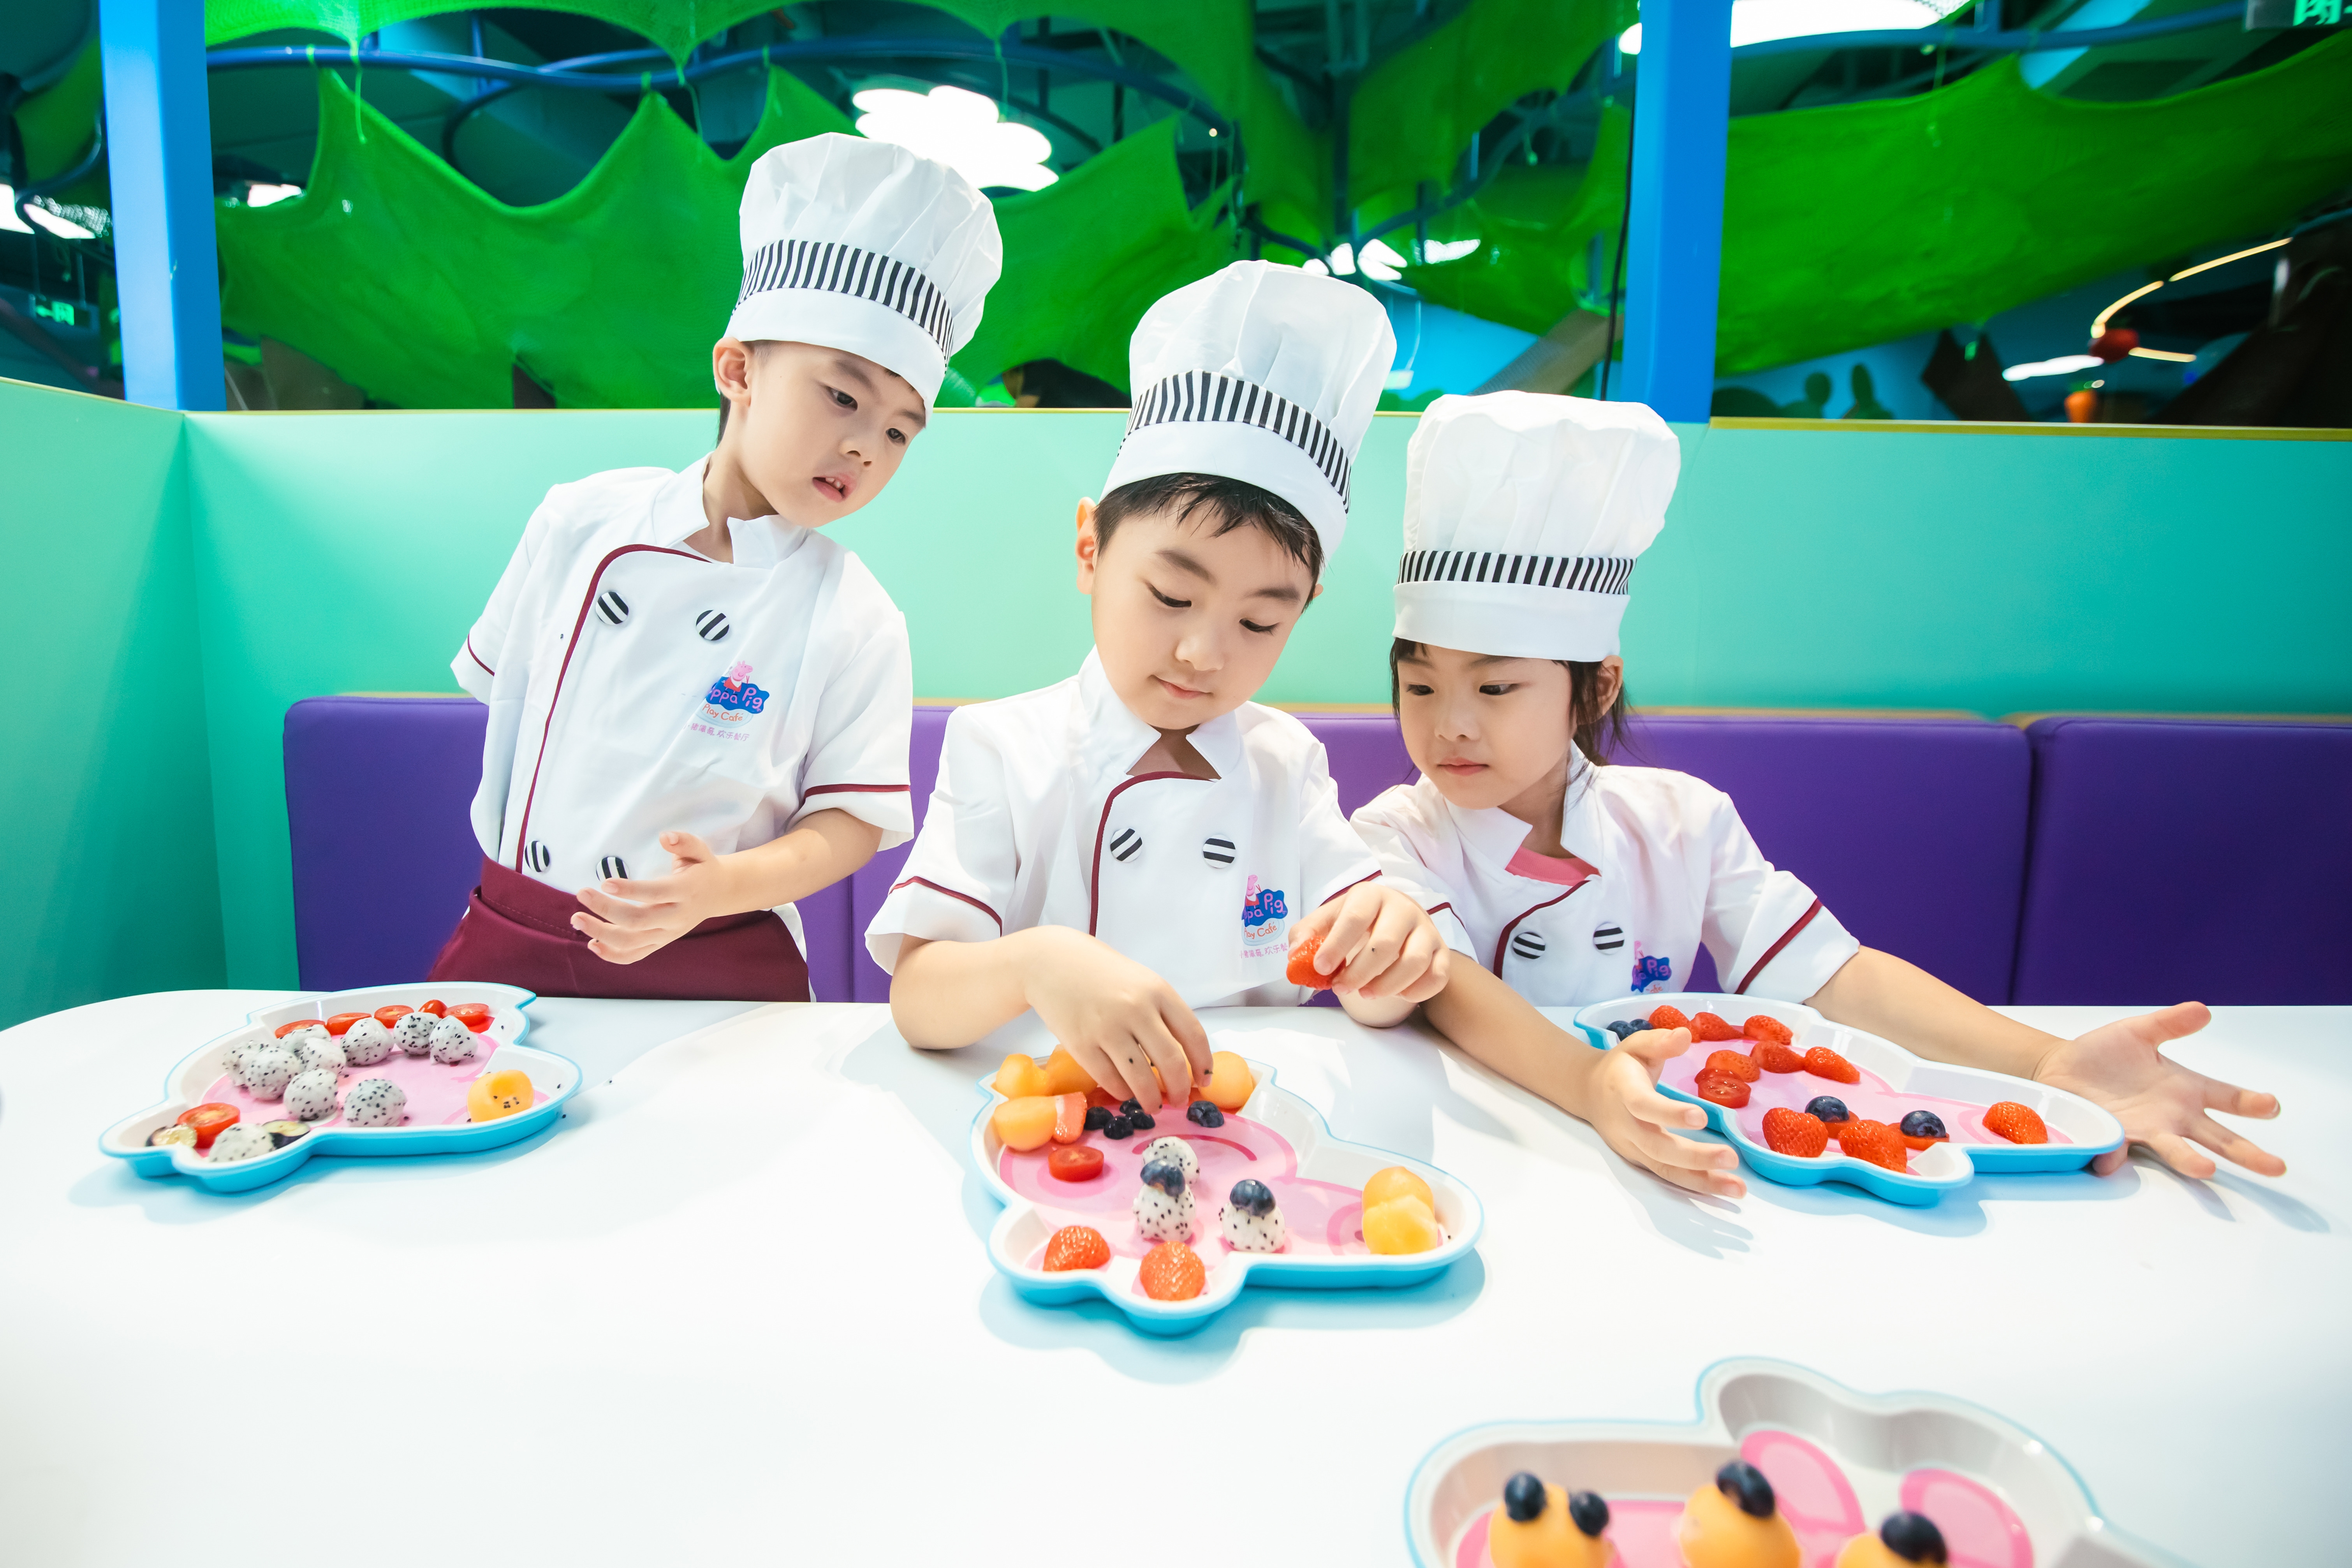 Peppa Pig Play Cafe opens in Southwest China